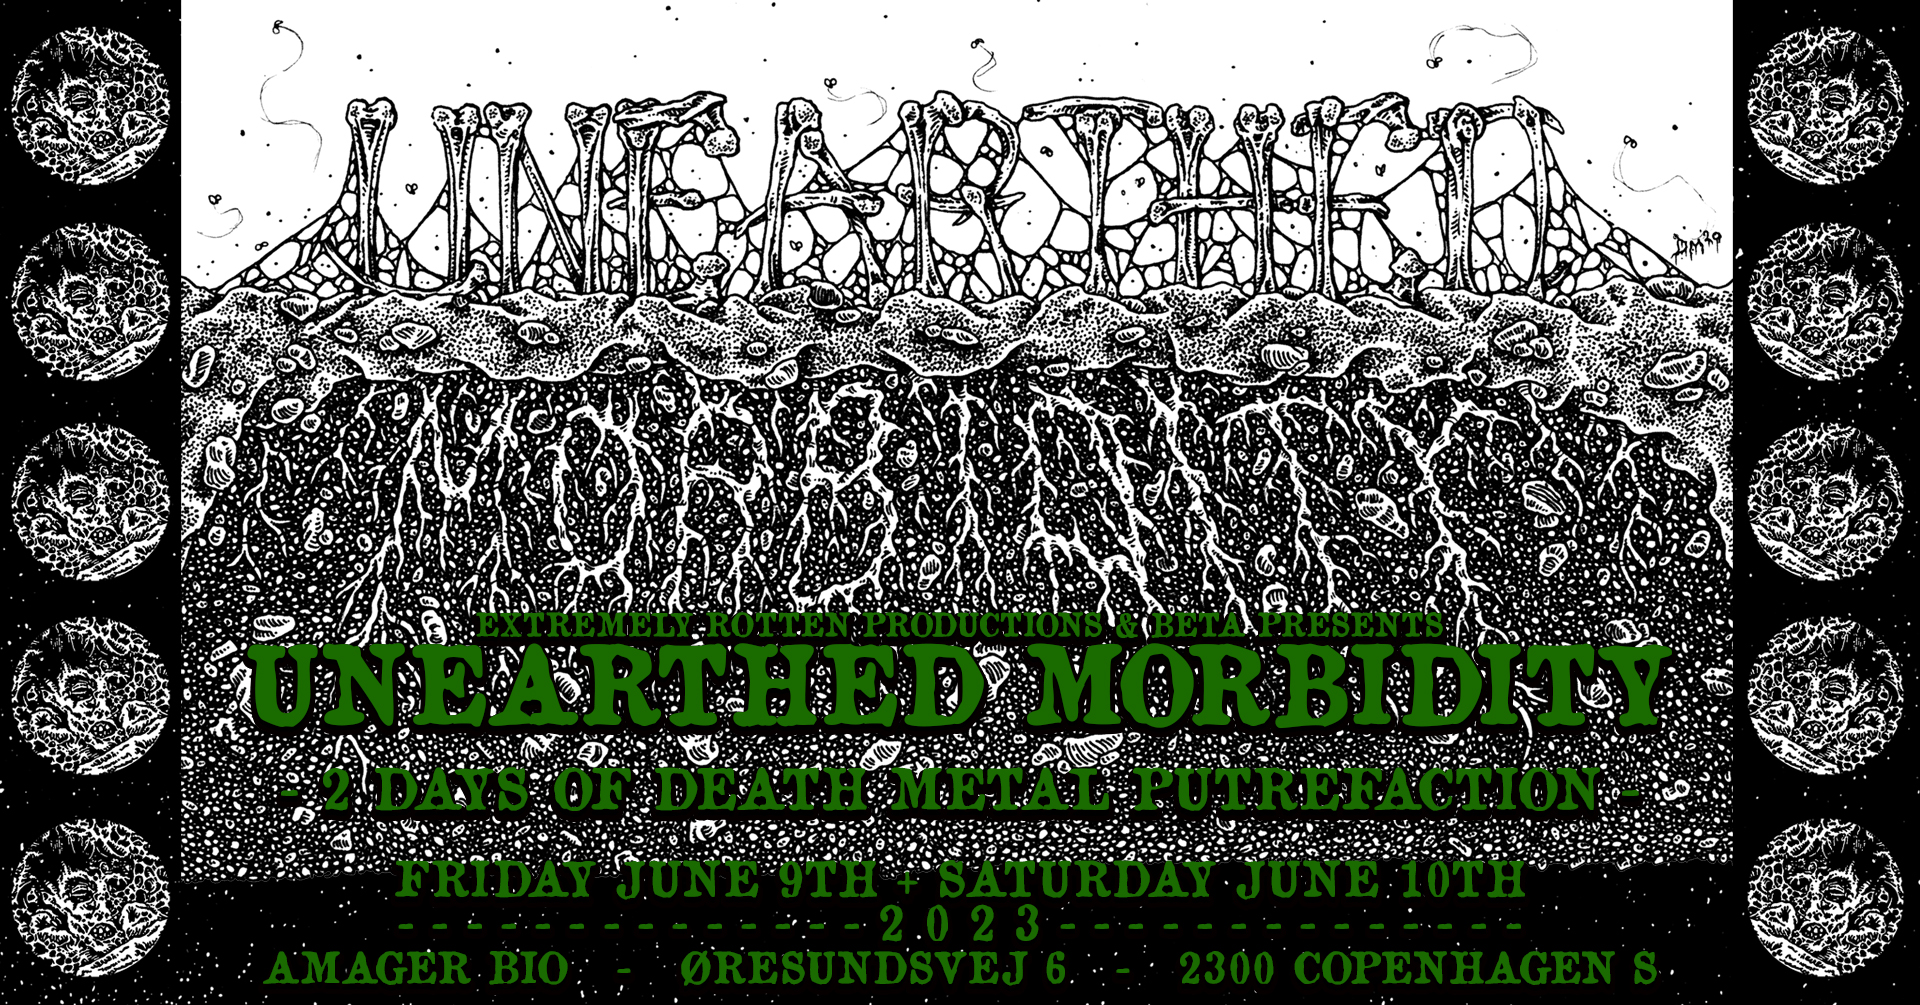 Unearthed Morbidity 2023 - FB event page header